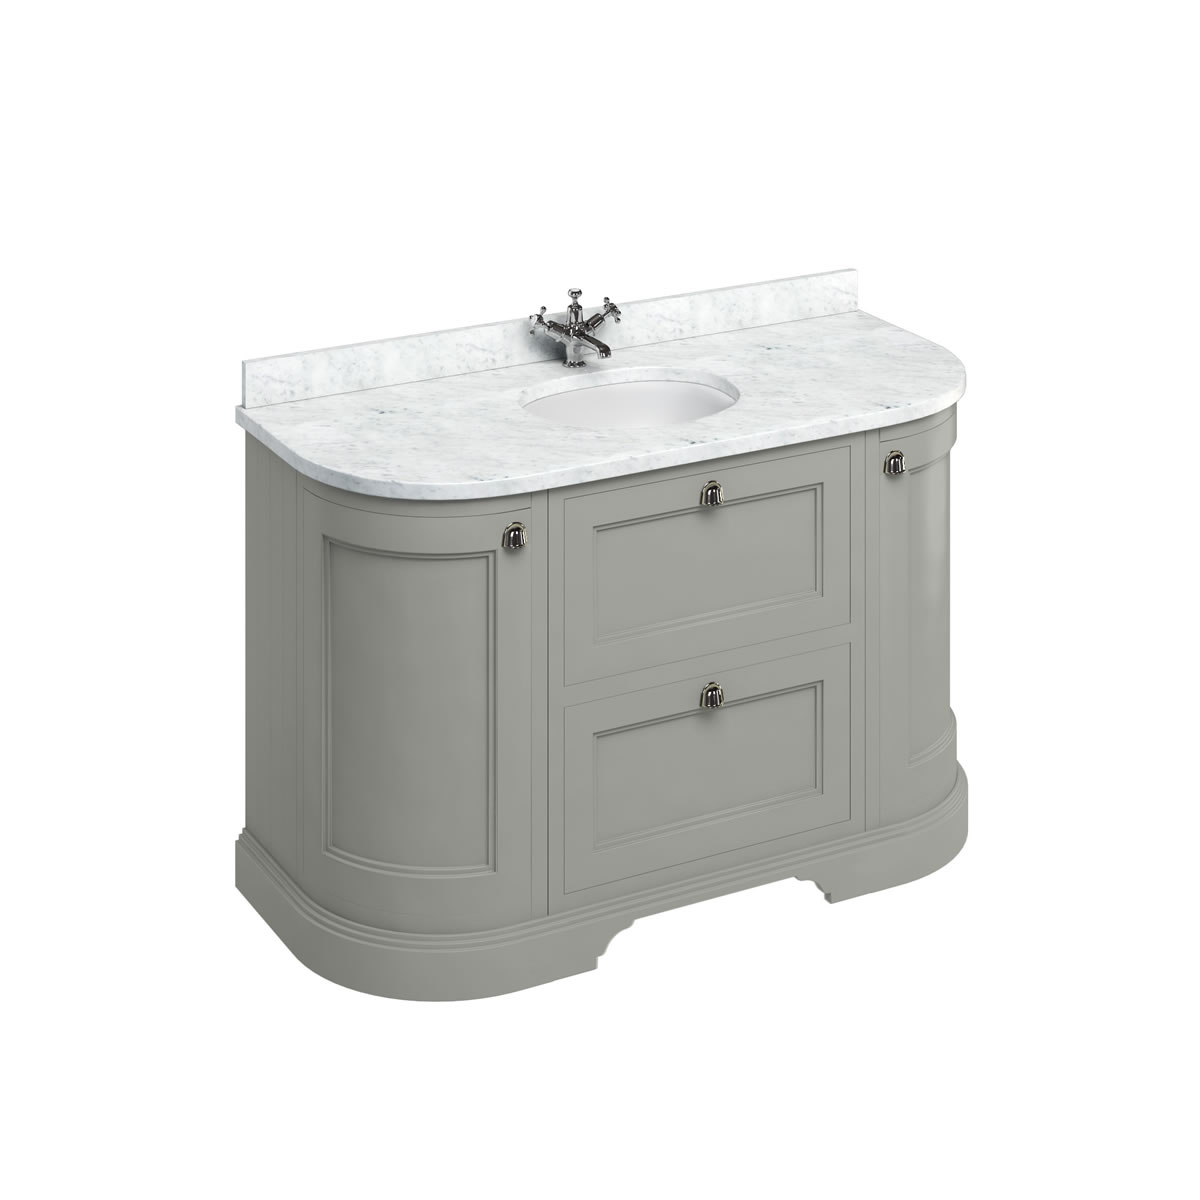 Freestanding 134 Curved Vanity Unit with drawers - Dark Olive and Minerva Carrara white worktop with integrated white basin